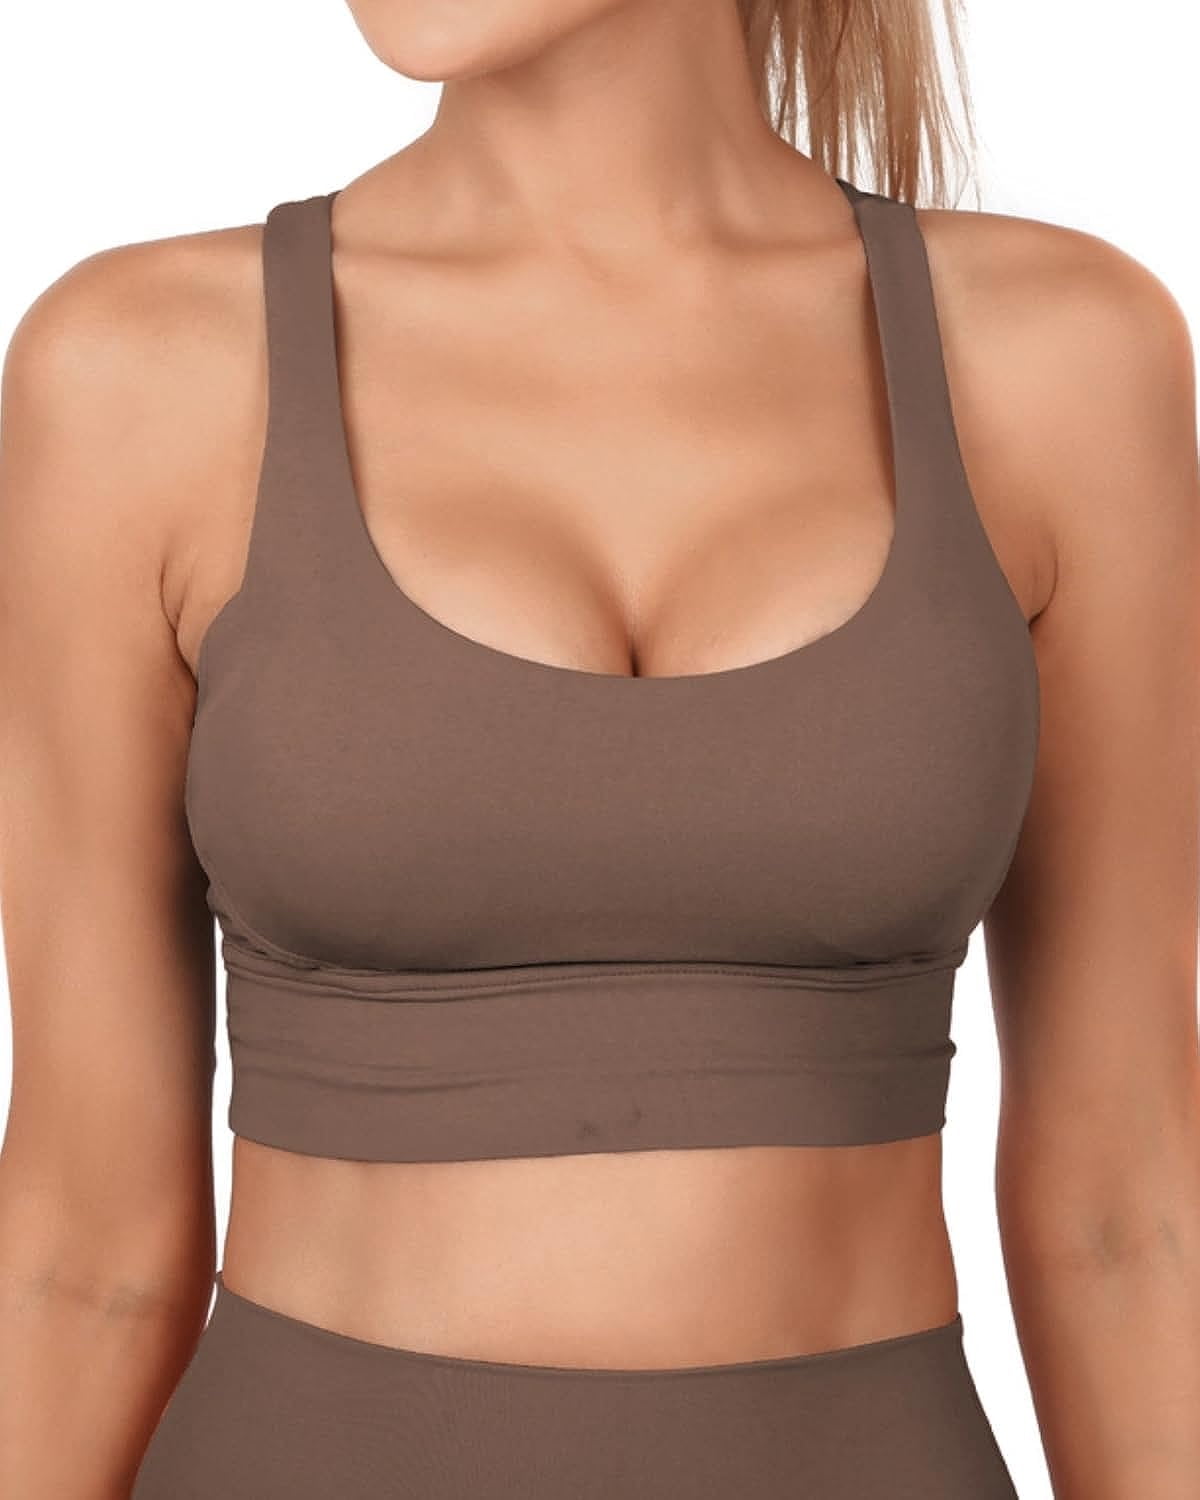 Grace Form Strappy Sports Bra for Women Padded High Impact Push Up